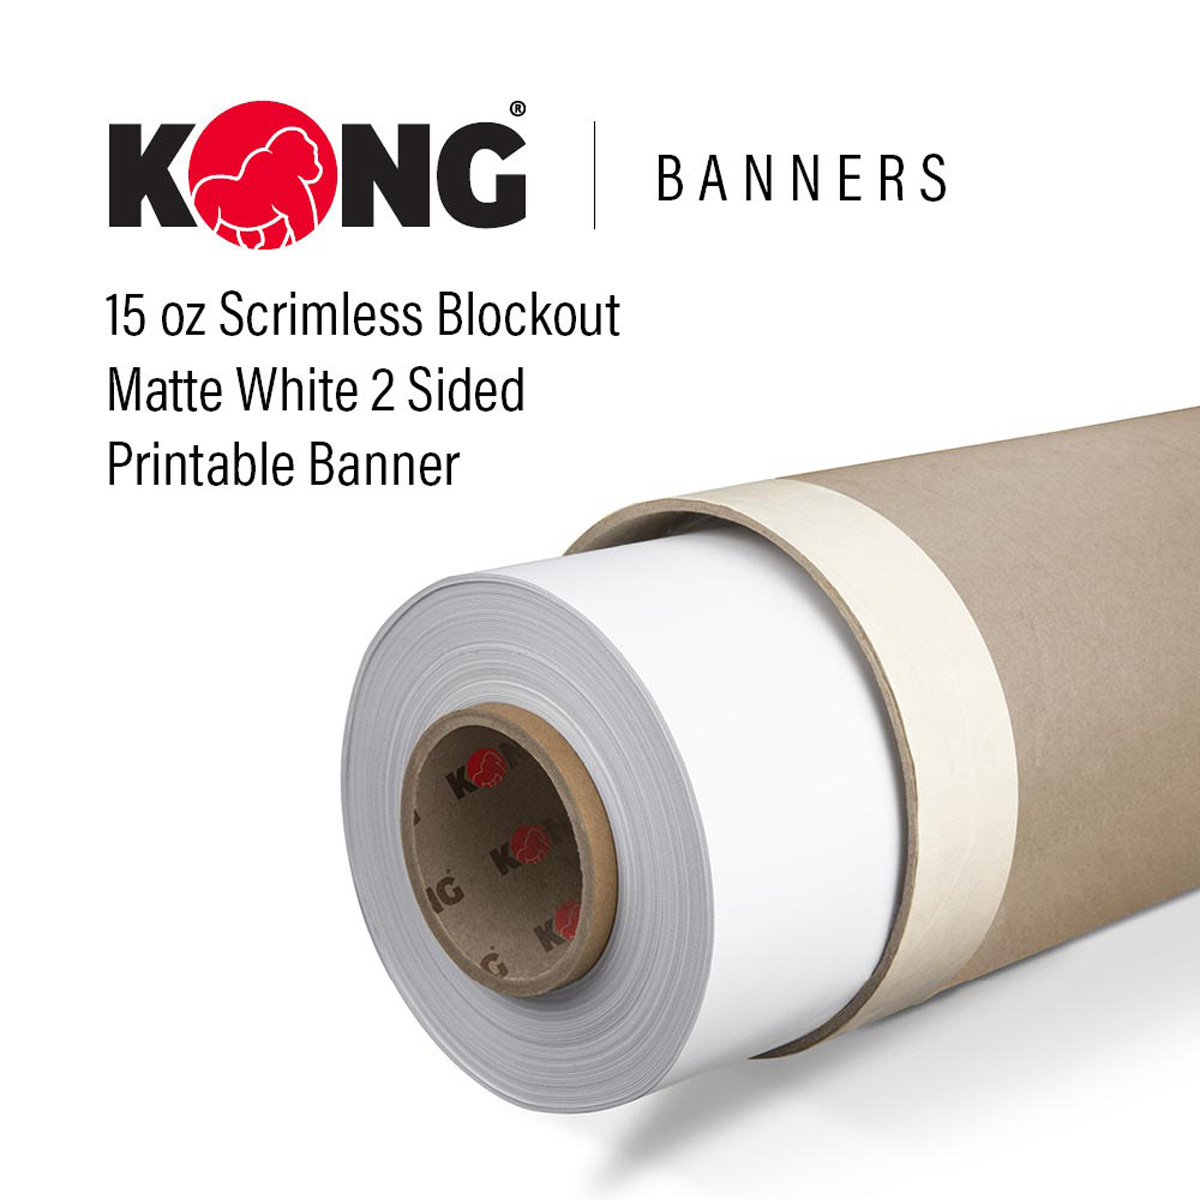 80'' x 165' Kong Banner - 15 OZ Scrimless Blockout Matte White 2 Sided Printable Banner